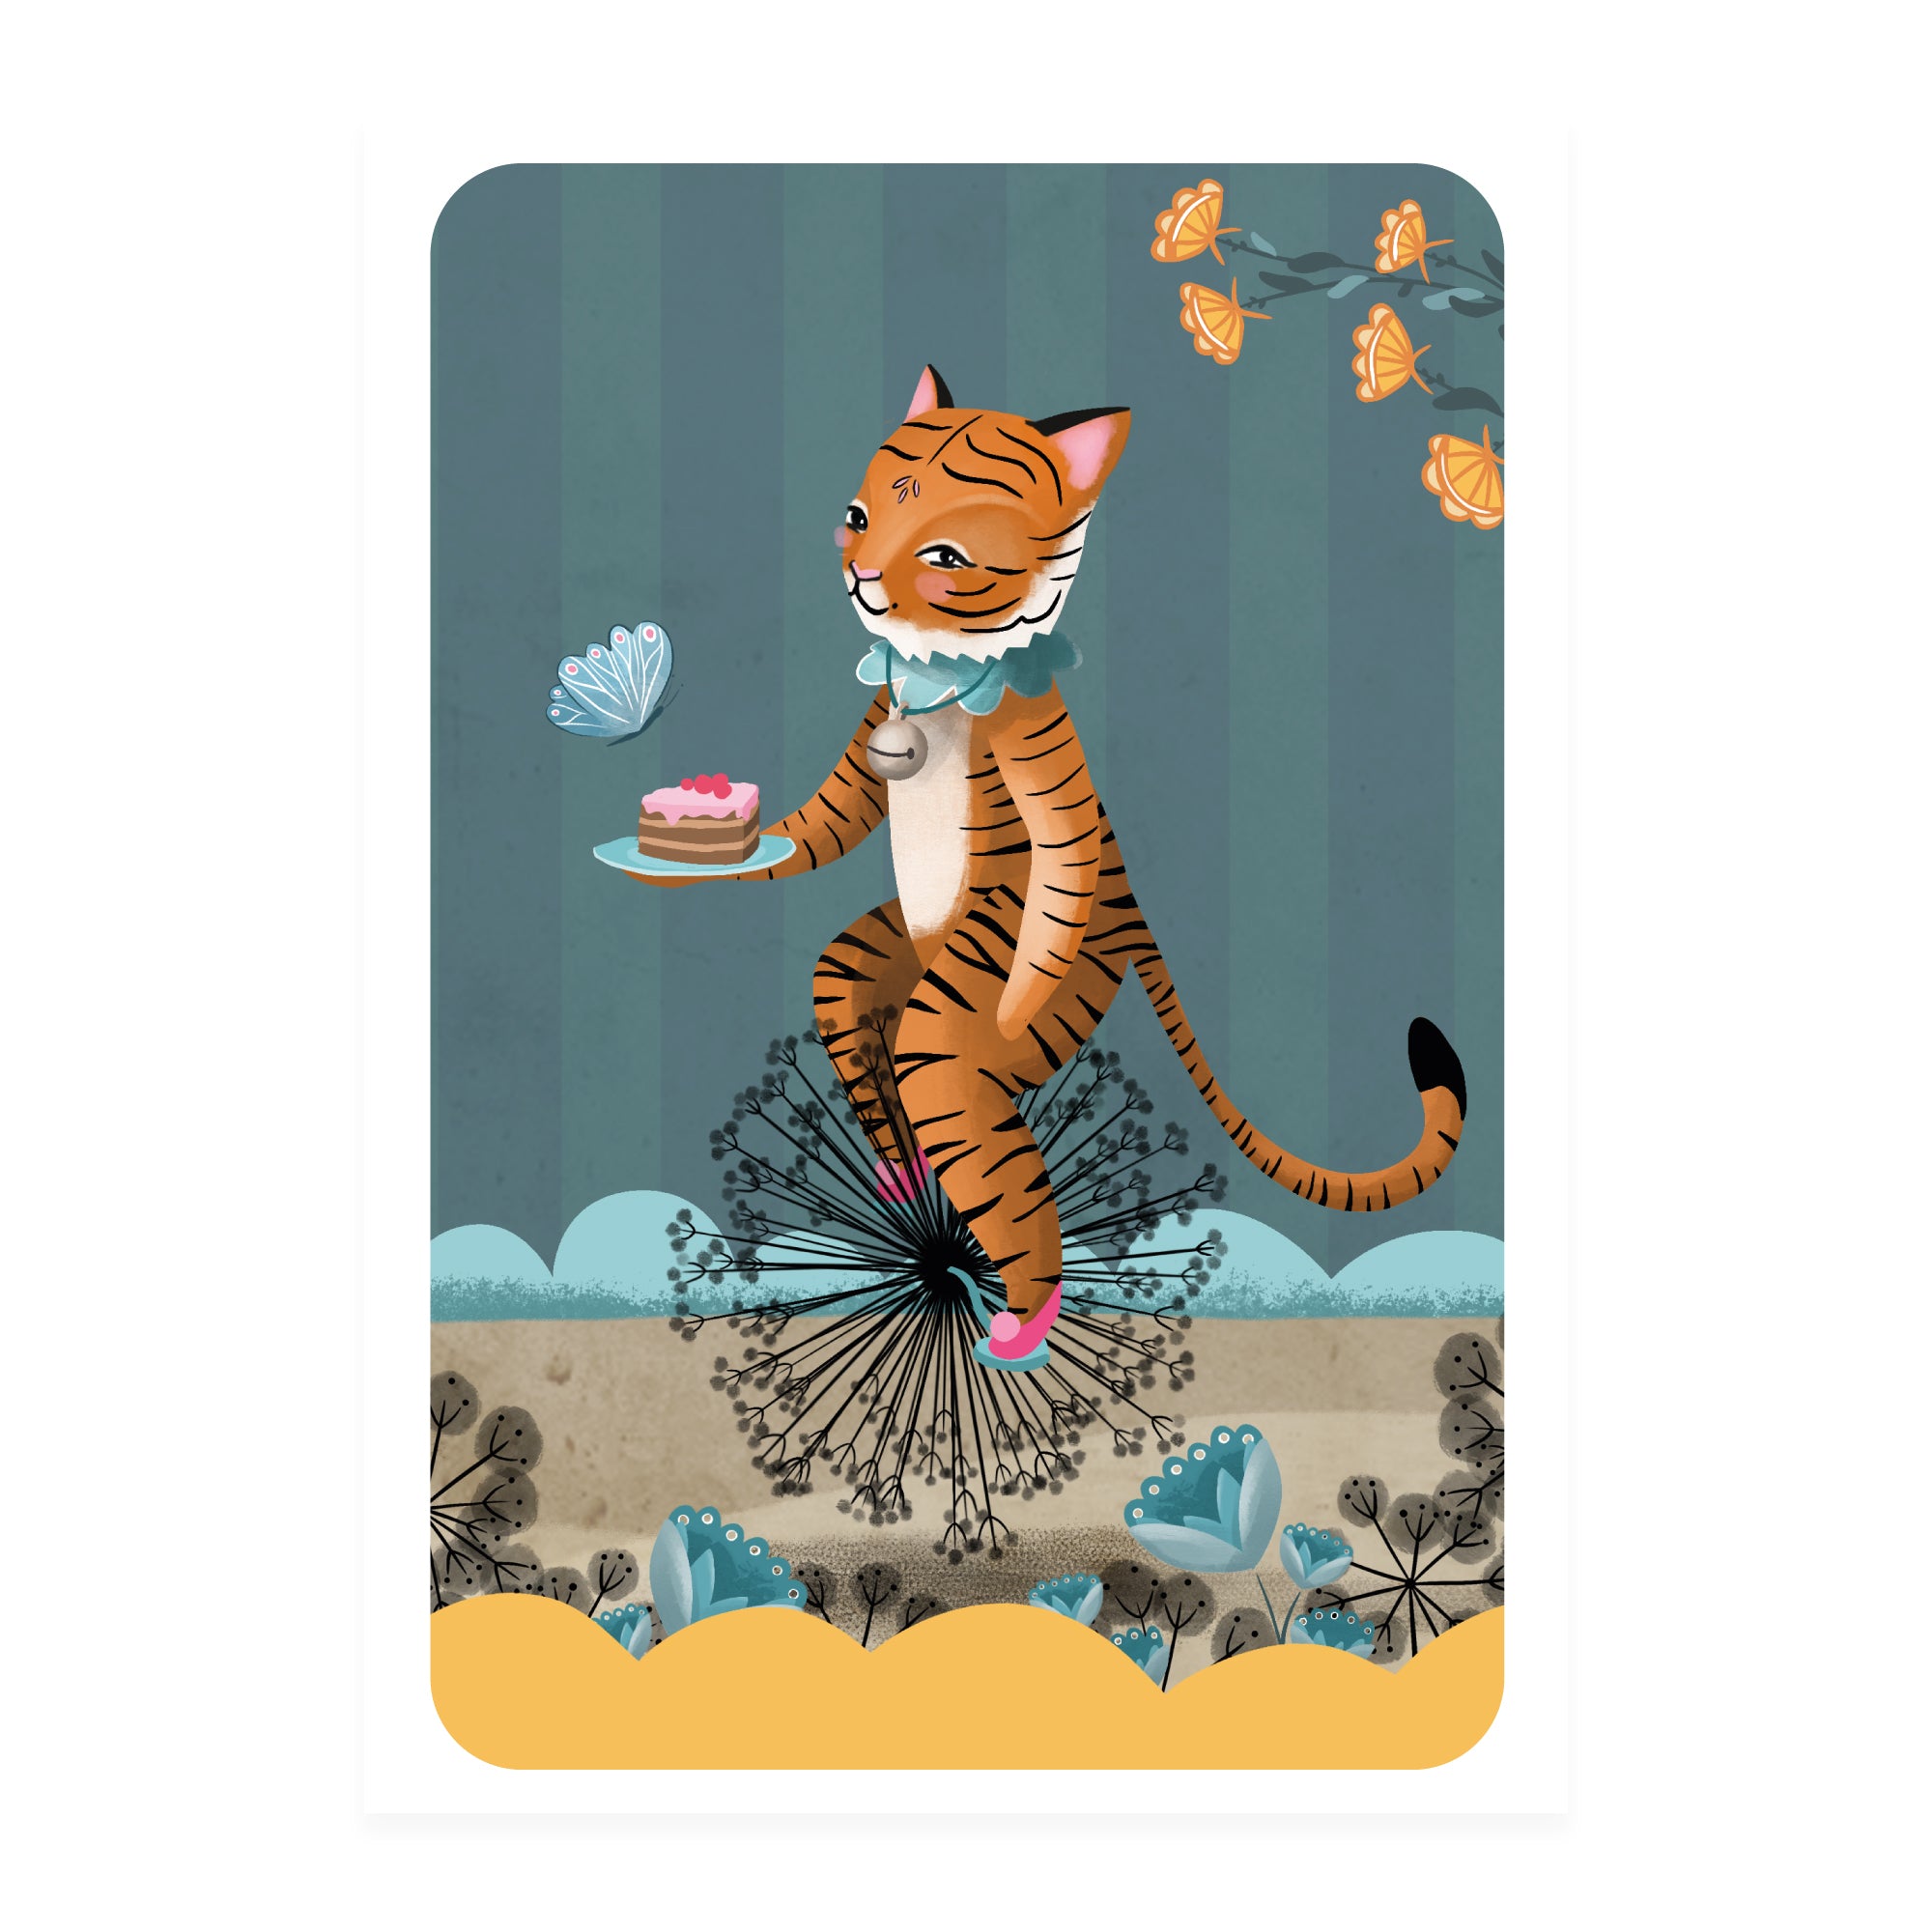 Unicycling Tiger greetings card - blank